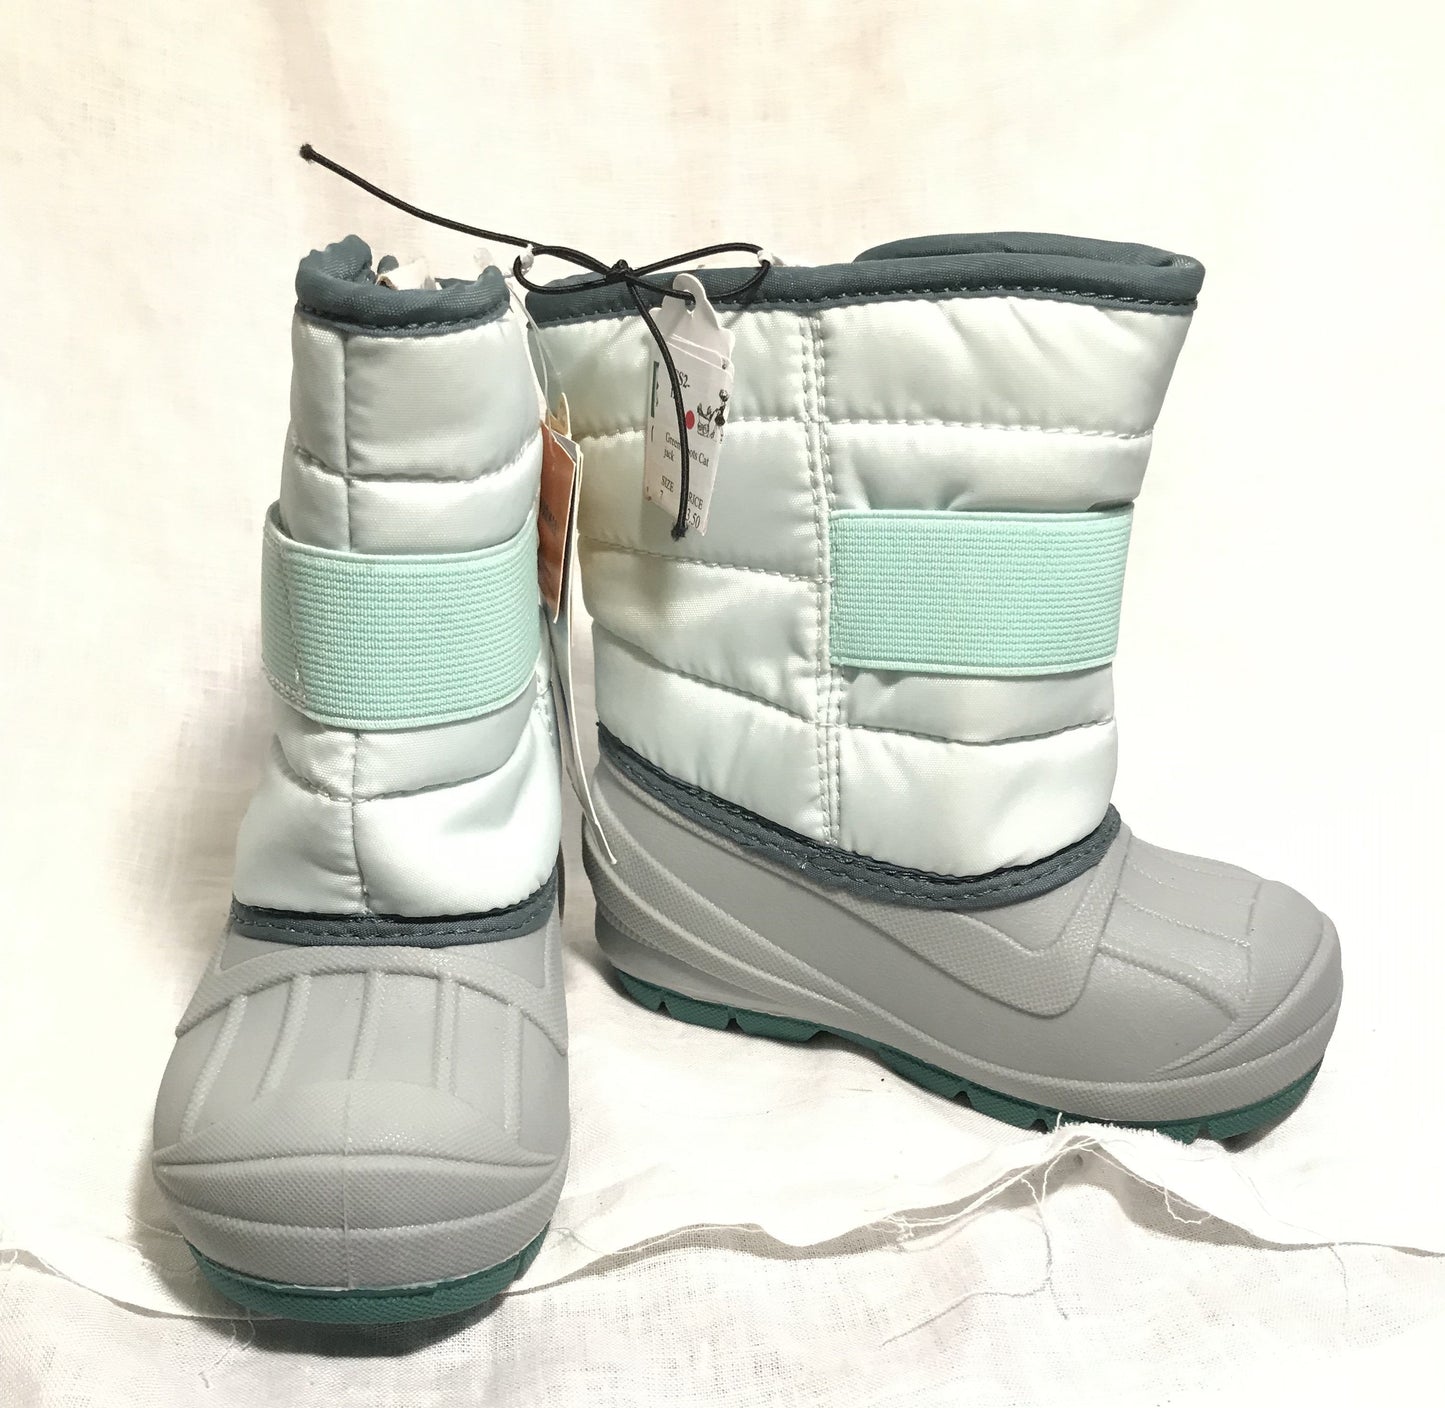 Teal & Gray Boots- Sizes 12